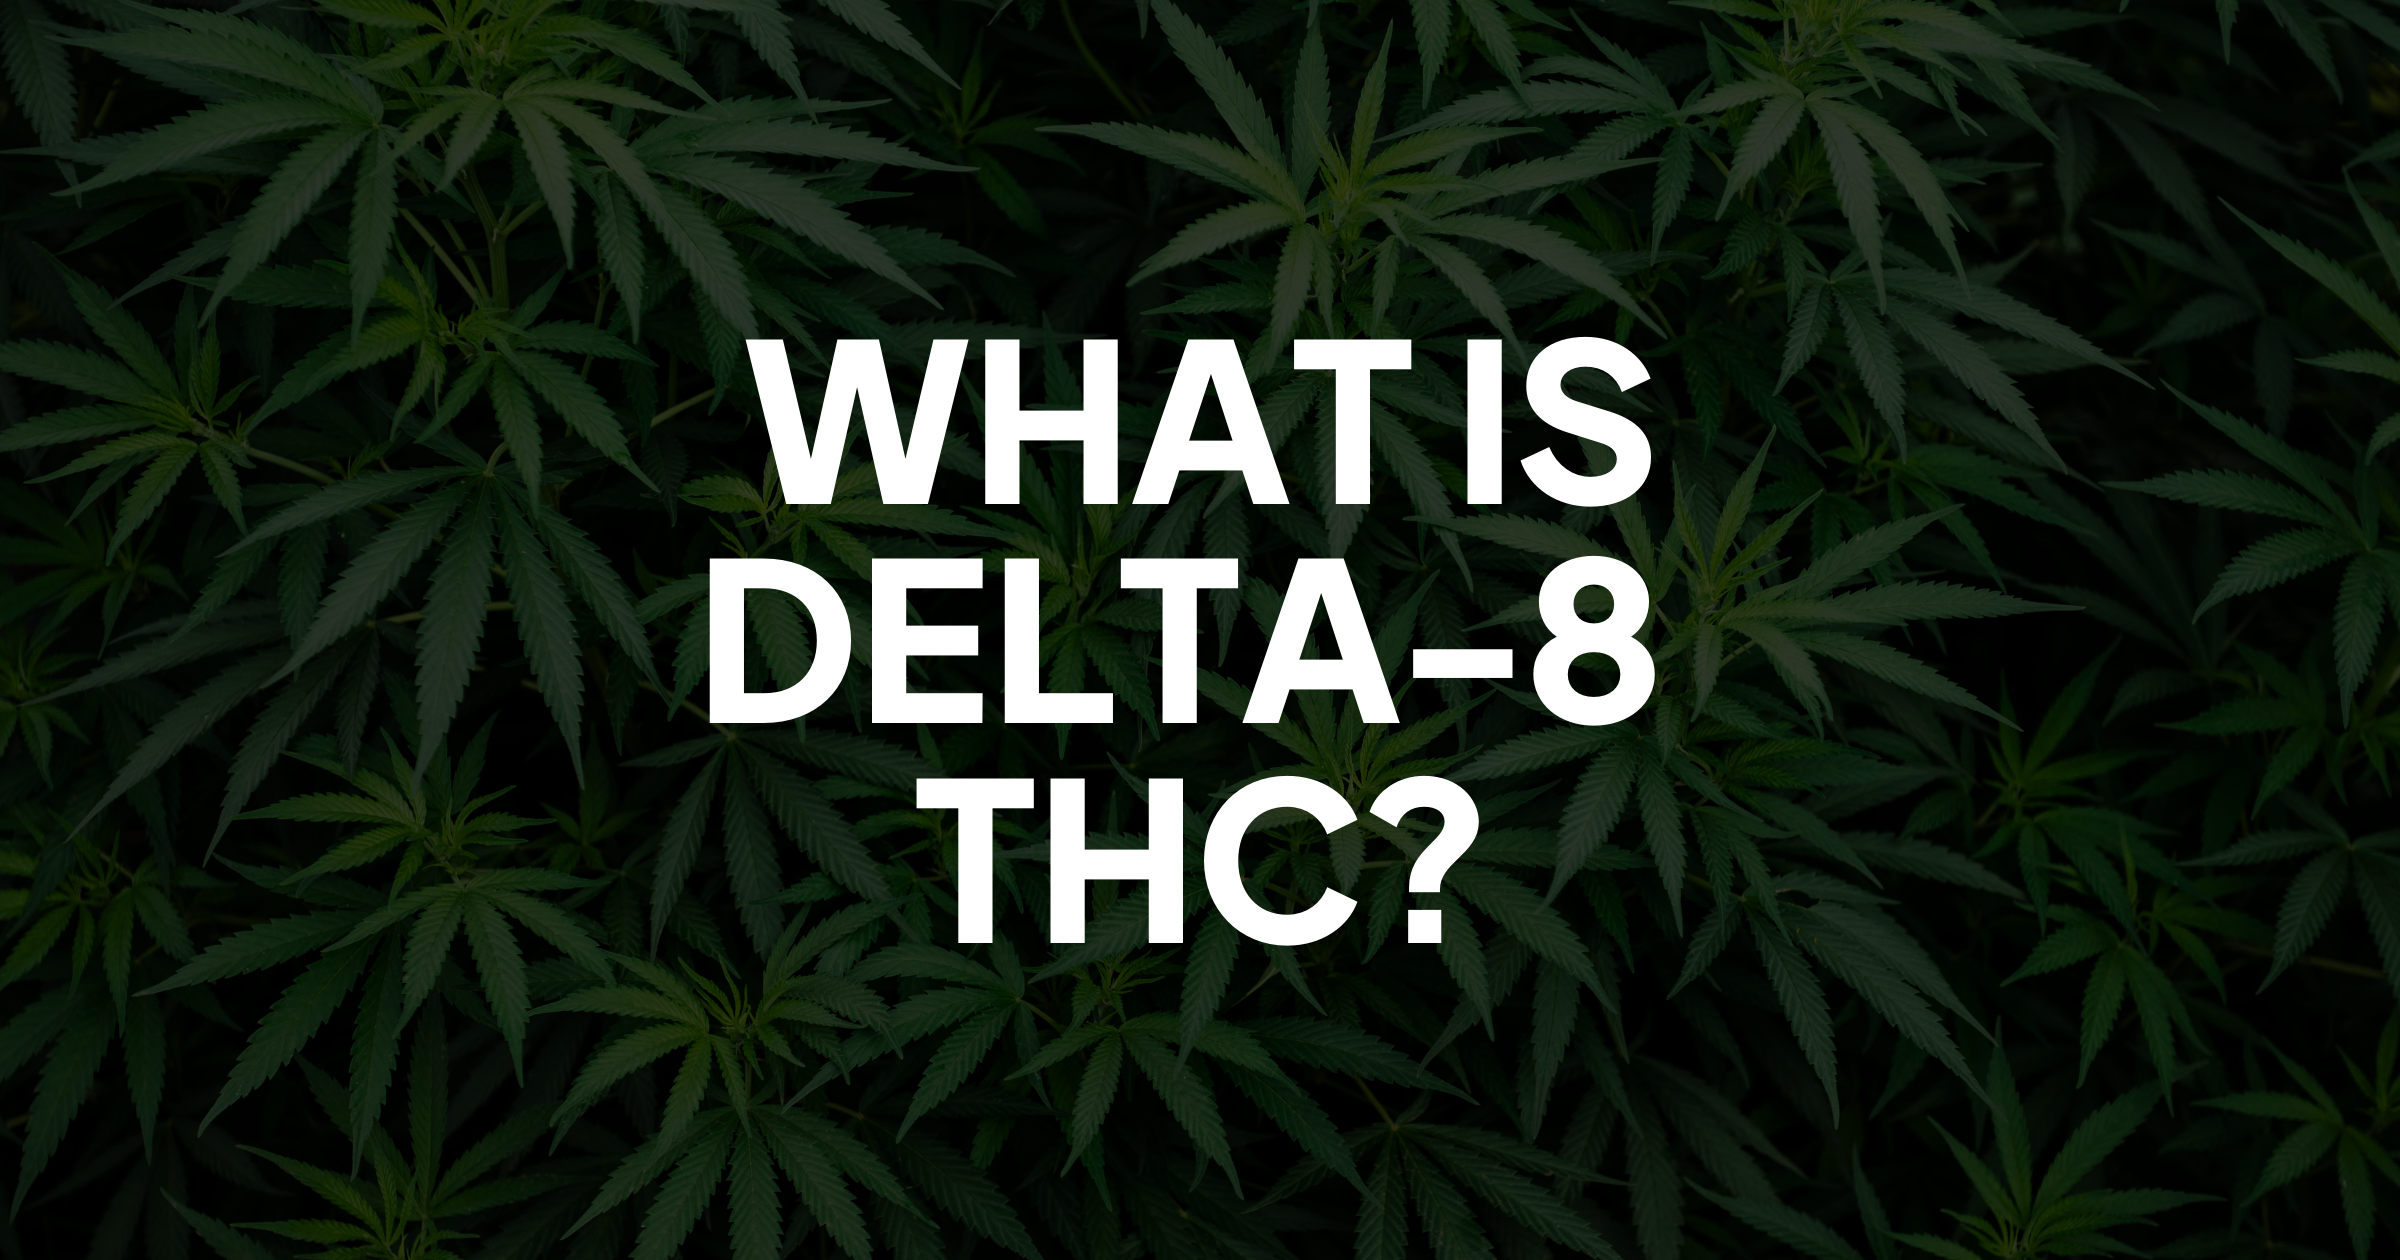 What Is Delta-8 Thc?